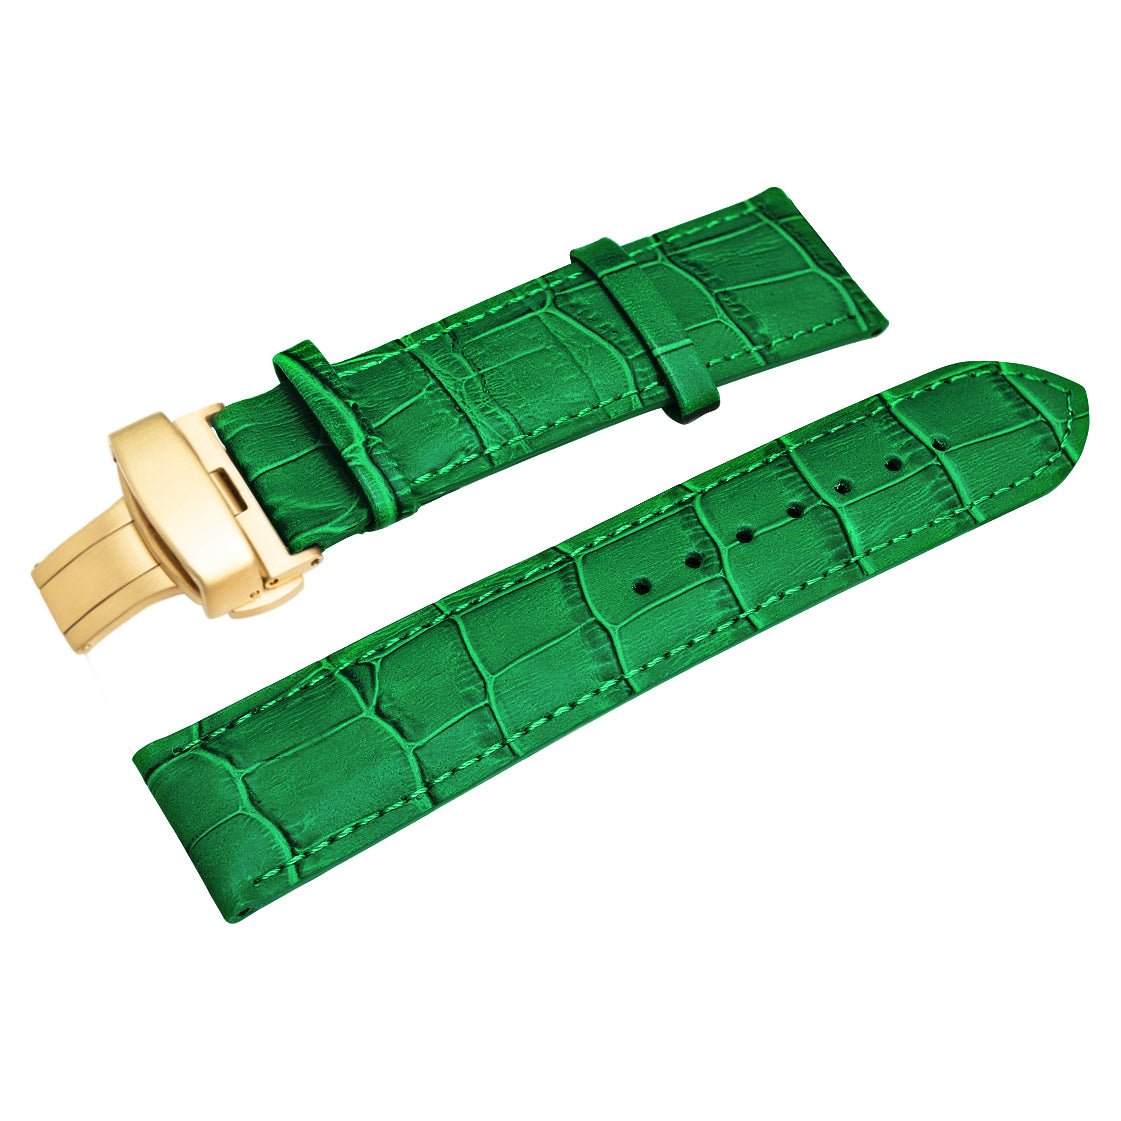 HERITAGE I watch strap, genuine cowhide, green alligator pattern. Elevate your SÖNER watch, brushed gold clasp.